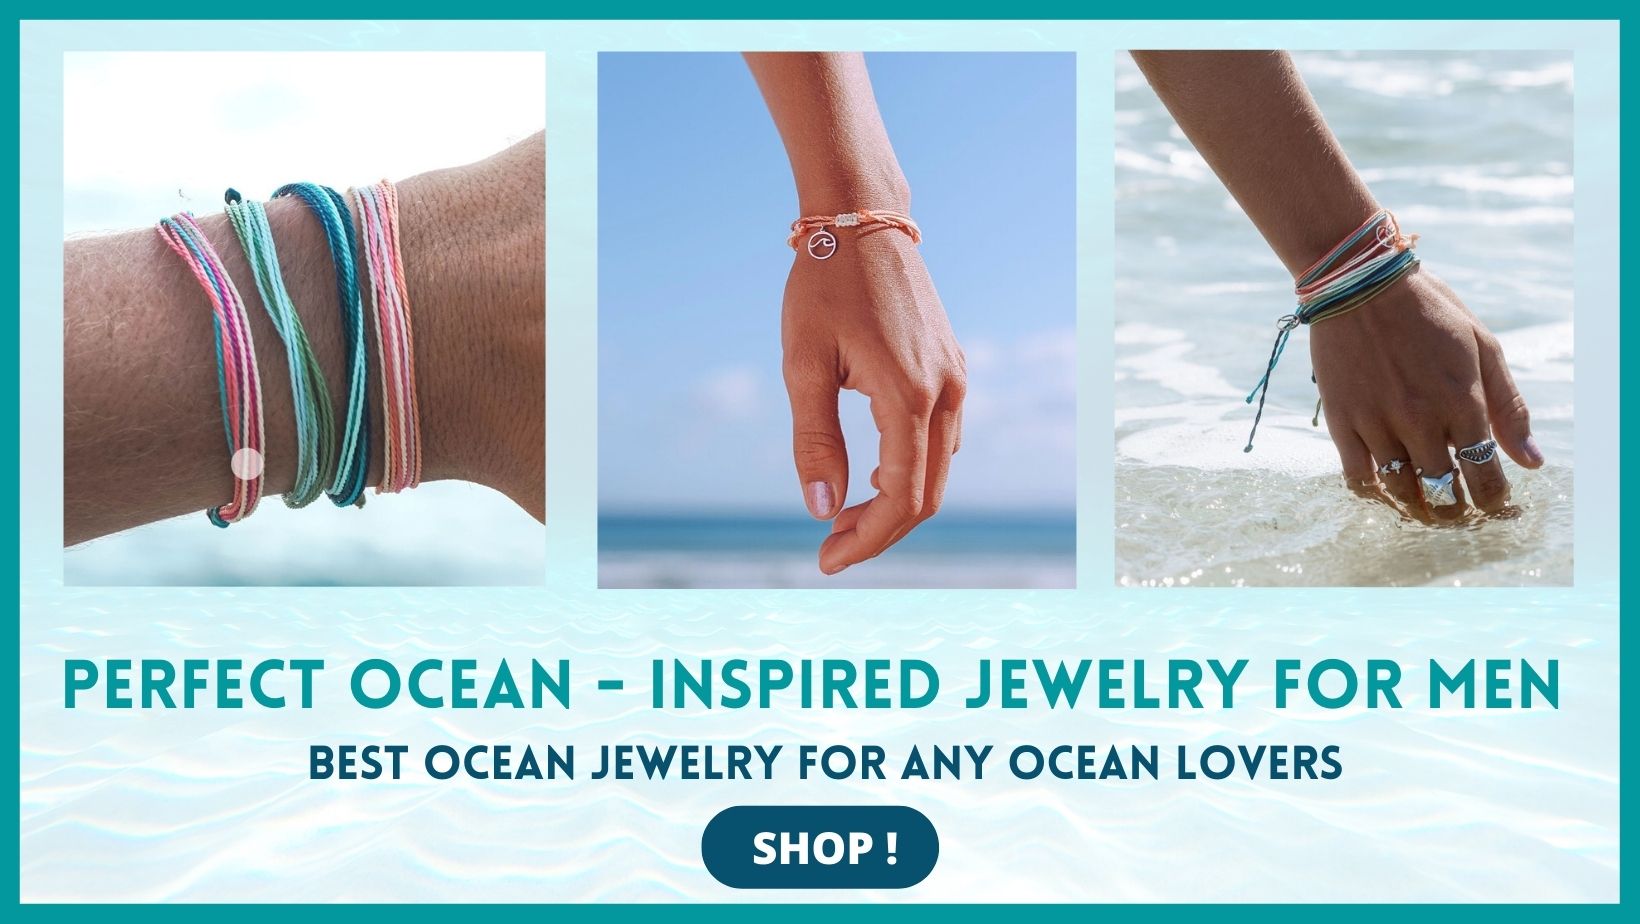 Ocean jewelry that suits for men